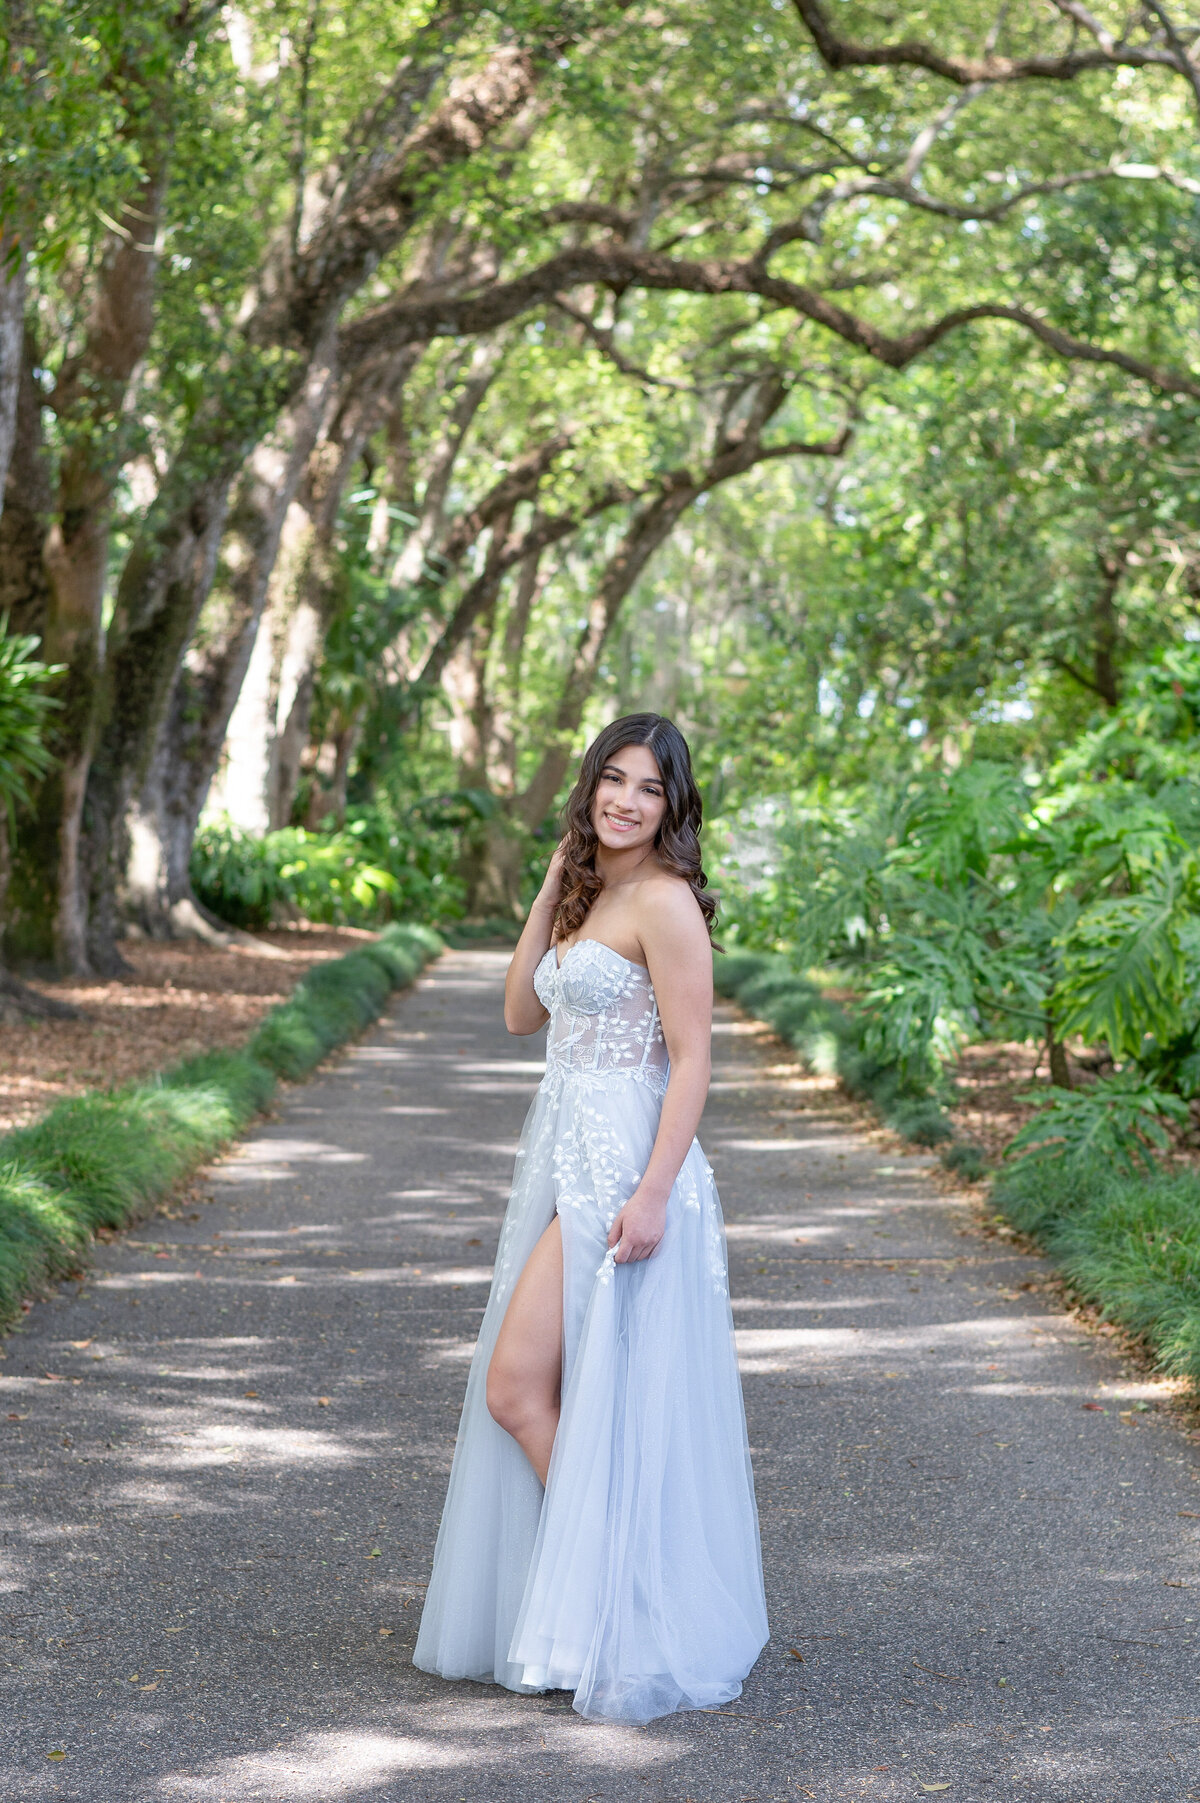 High school senior girl wearing floor length prom dress in middle of path smiles at the camera.